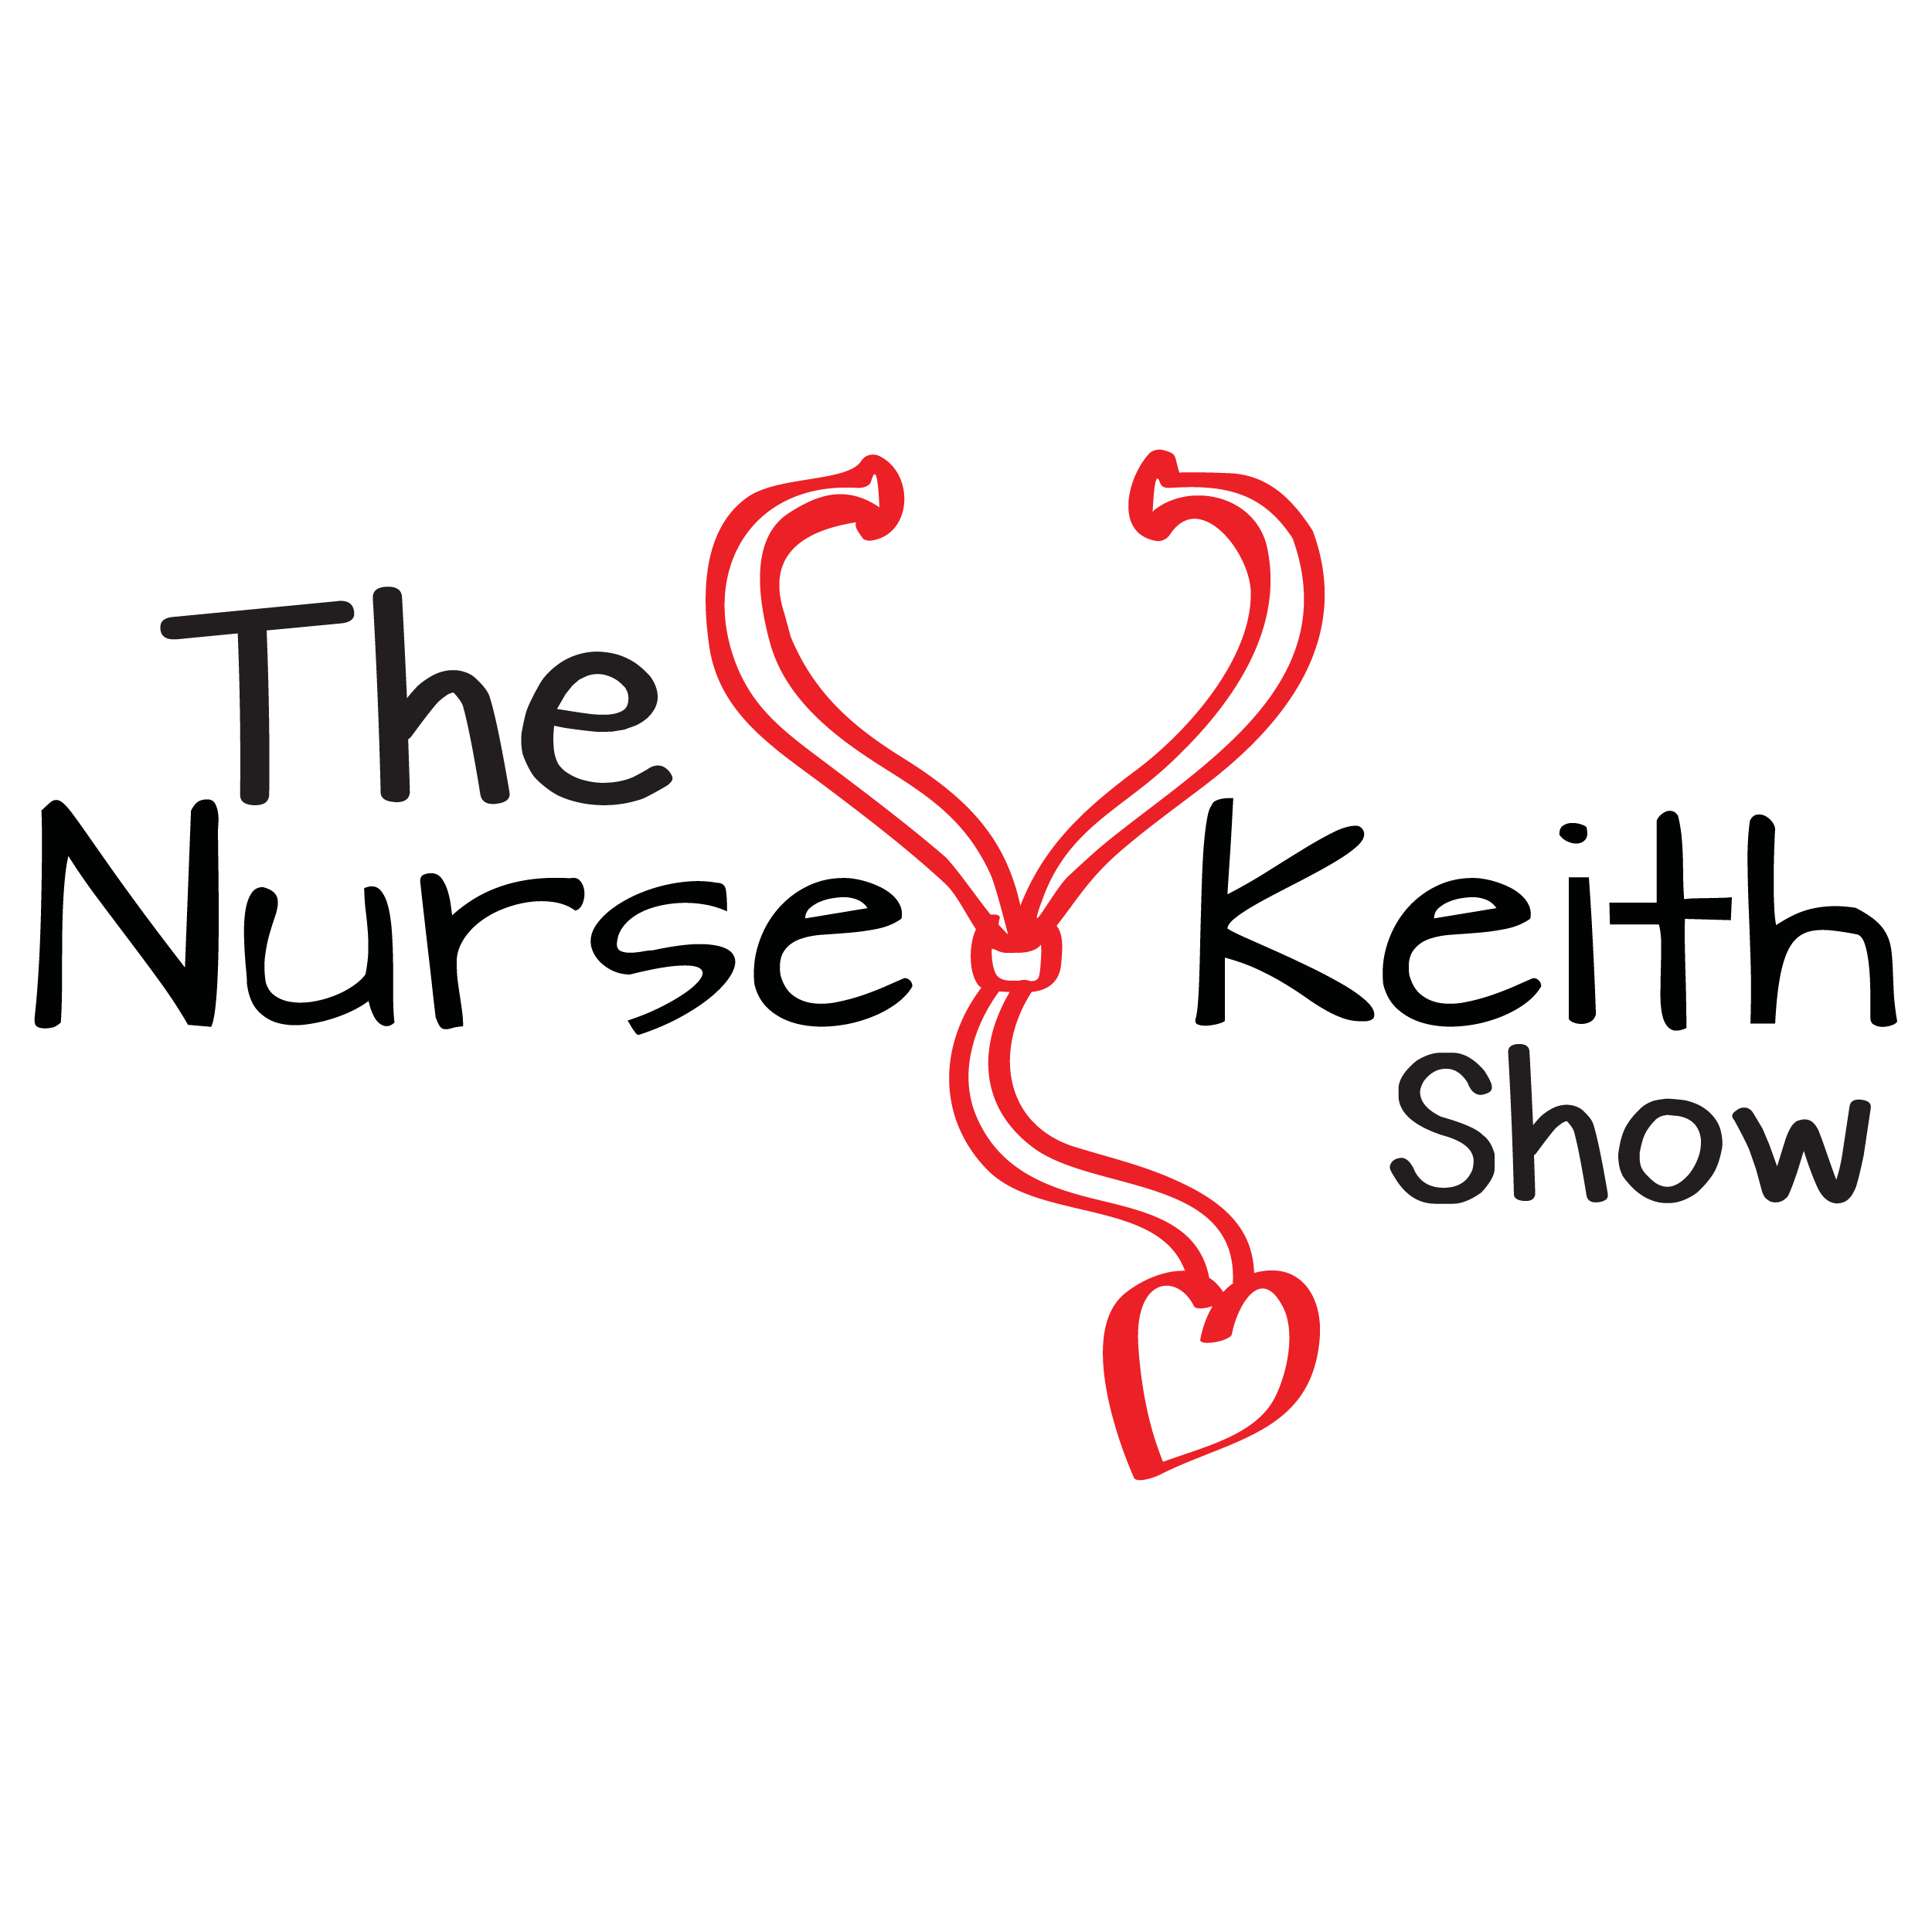 Empowering Nurses’ Net Worth Through Knowledge and Wealth-Building | The Nurse Keith Show, EPS 358